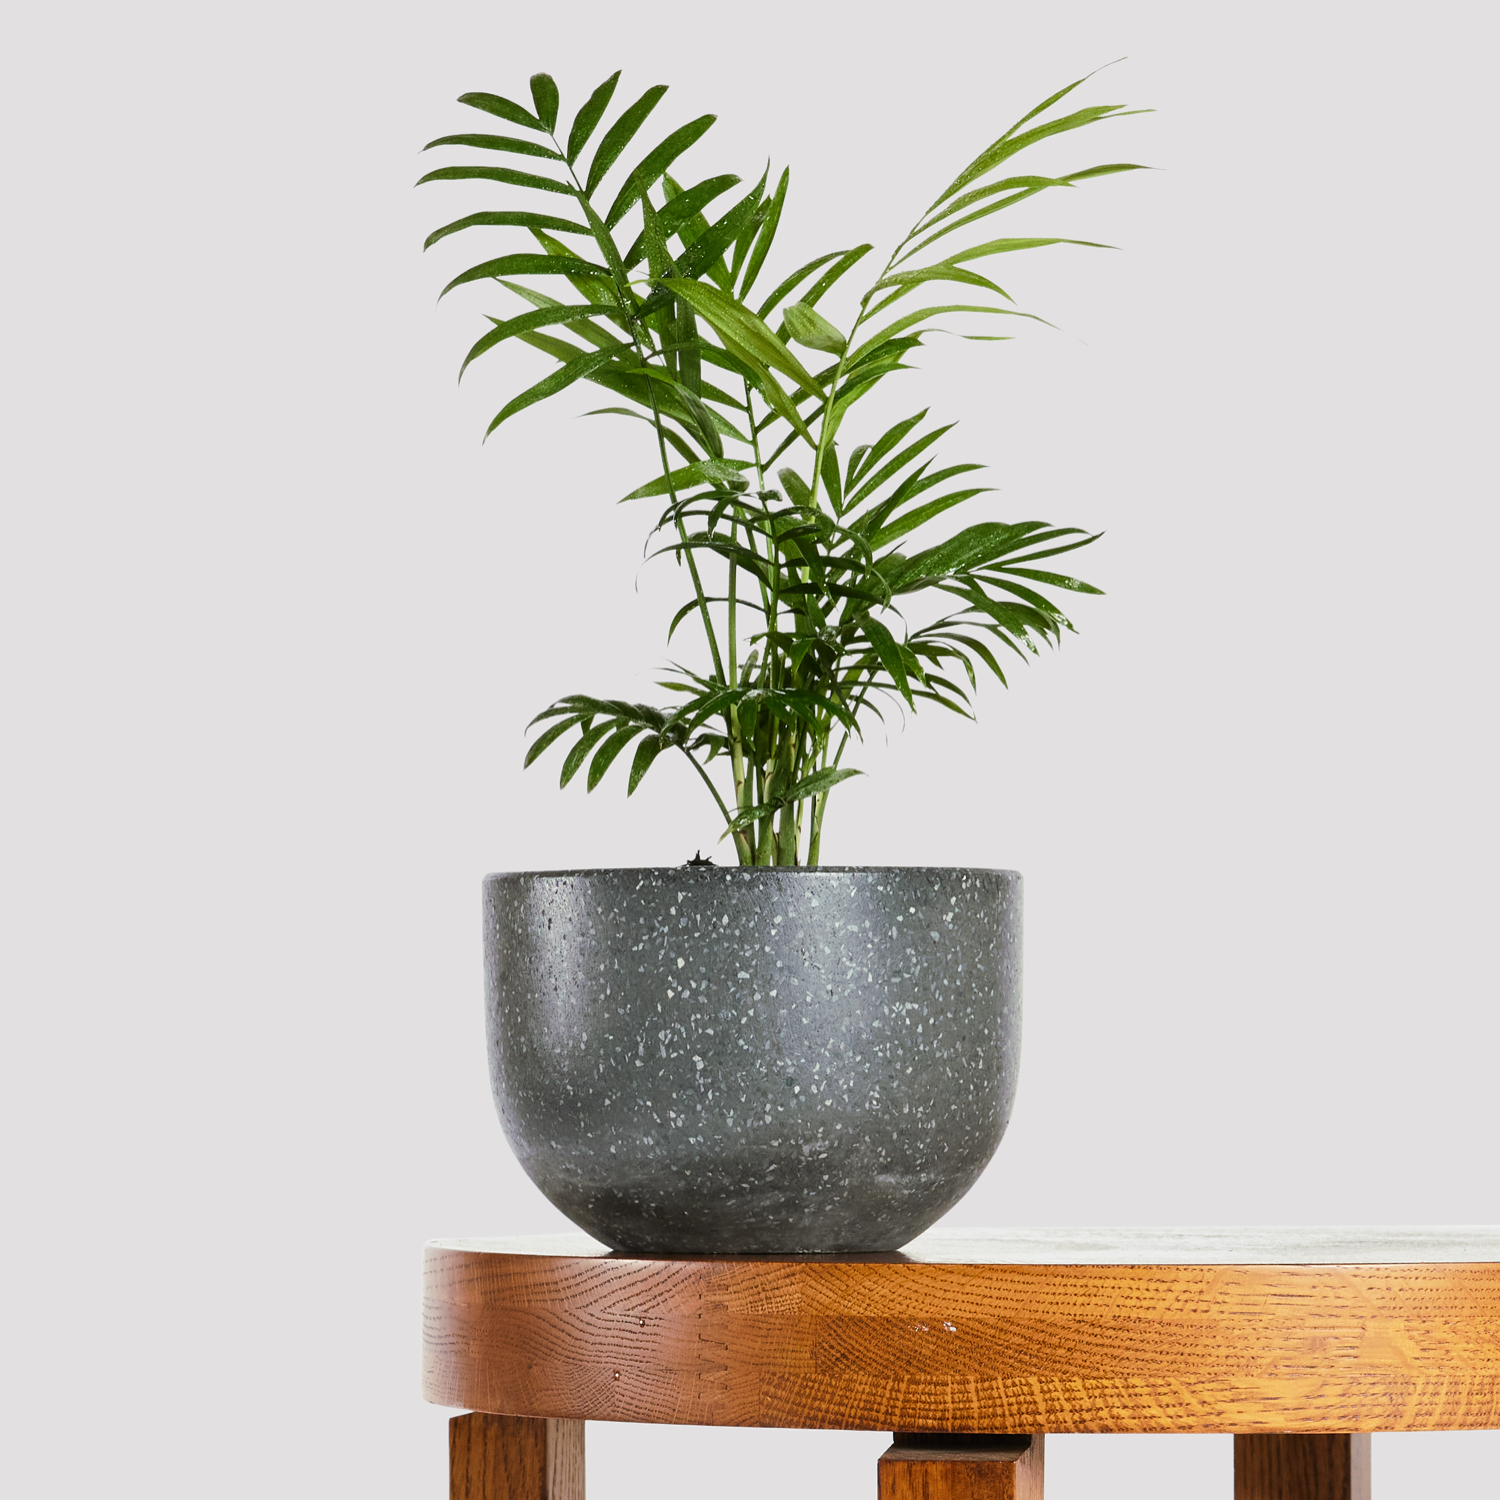 Bamboo Parlor Palm in Pierre Terrazzo Pot Black from The Good Plant Co